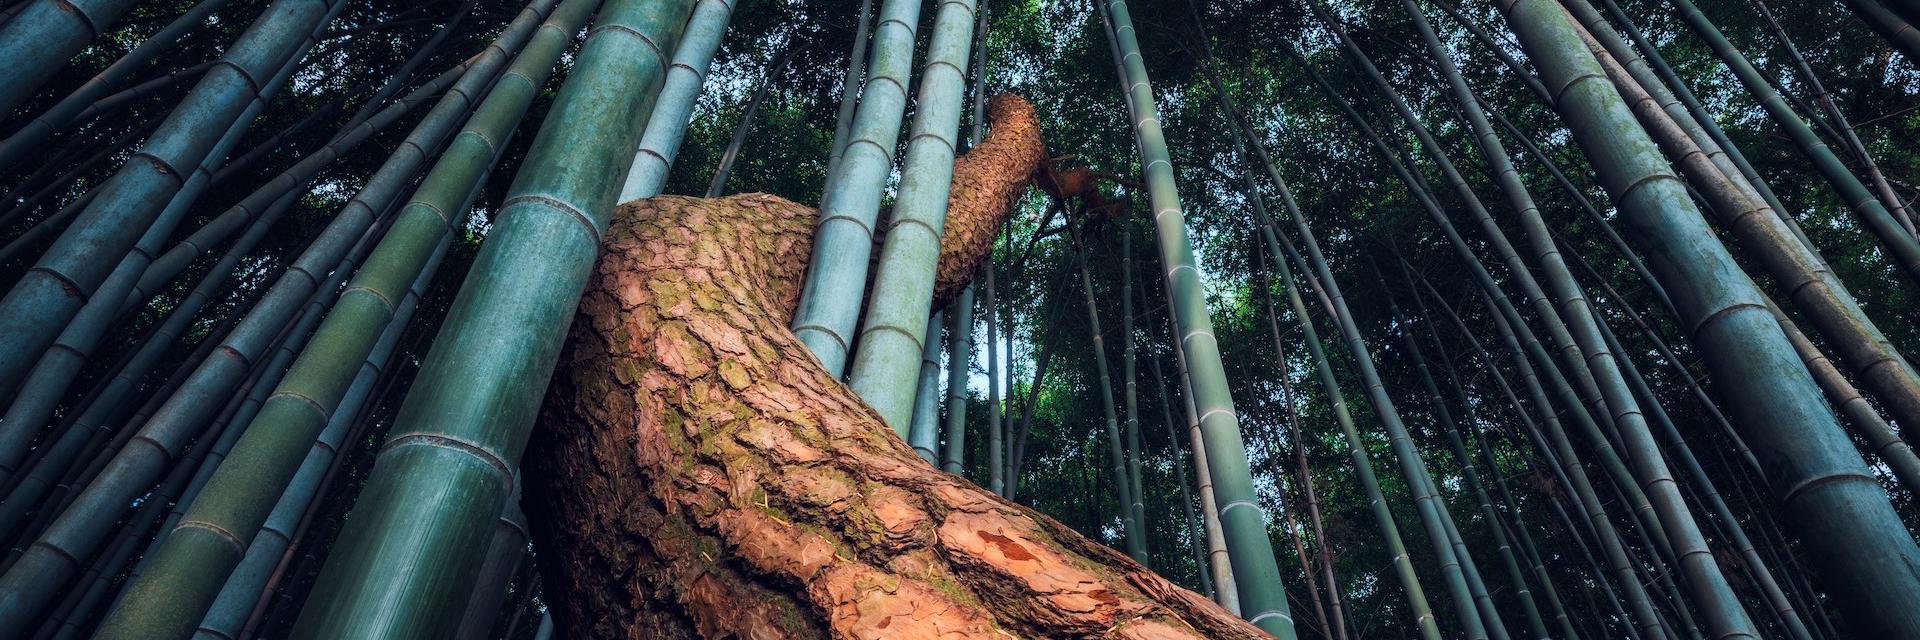 The sinuous trunk of a Korean pine (Pinus koraiensis) being overtaken by Moso bamboo (Phyllostachys heterocycla f. pubescens) in the Gyeongsang-do walled town in Korea.